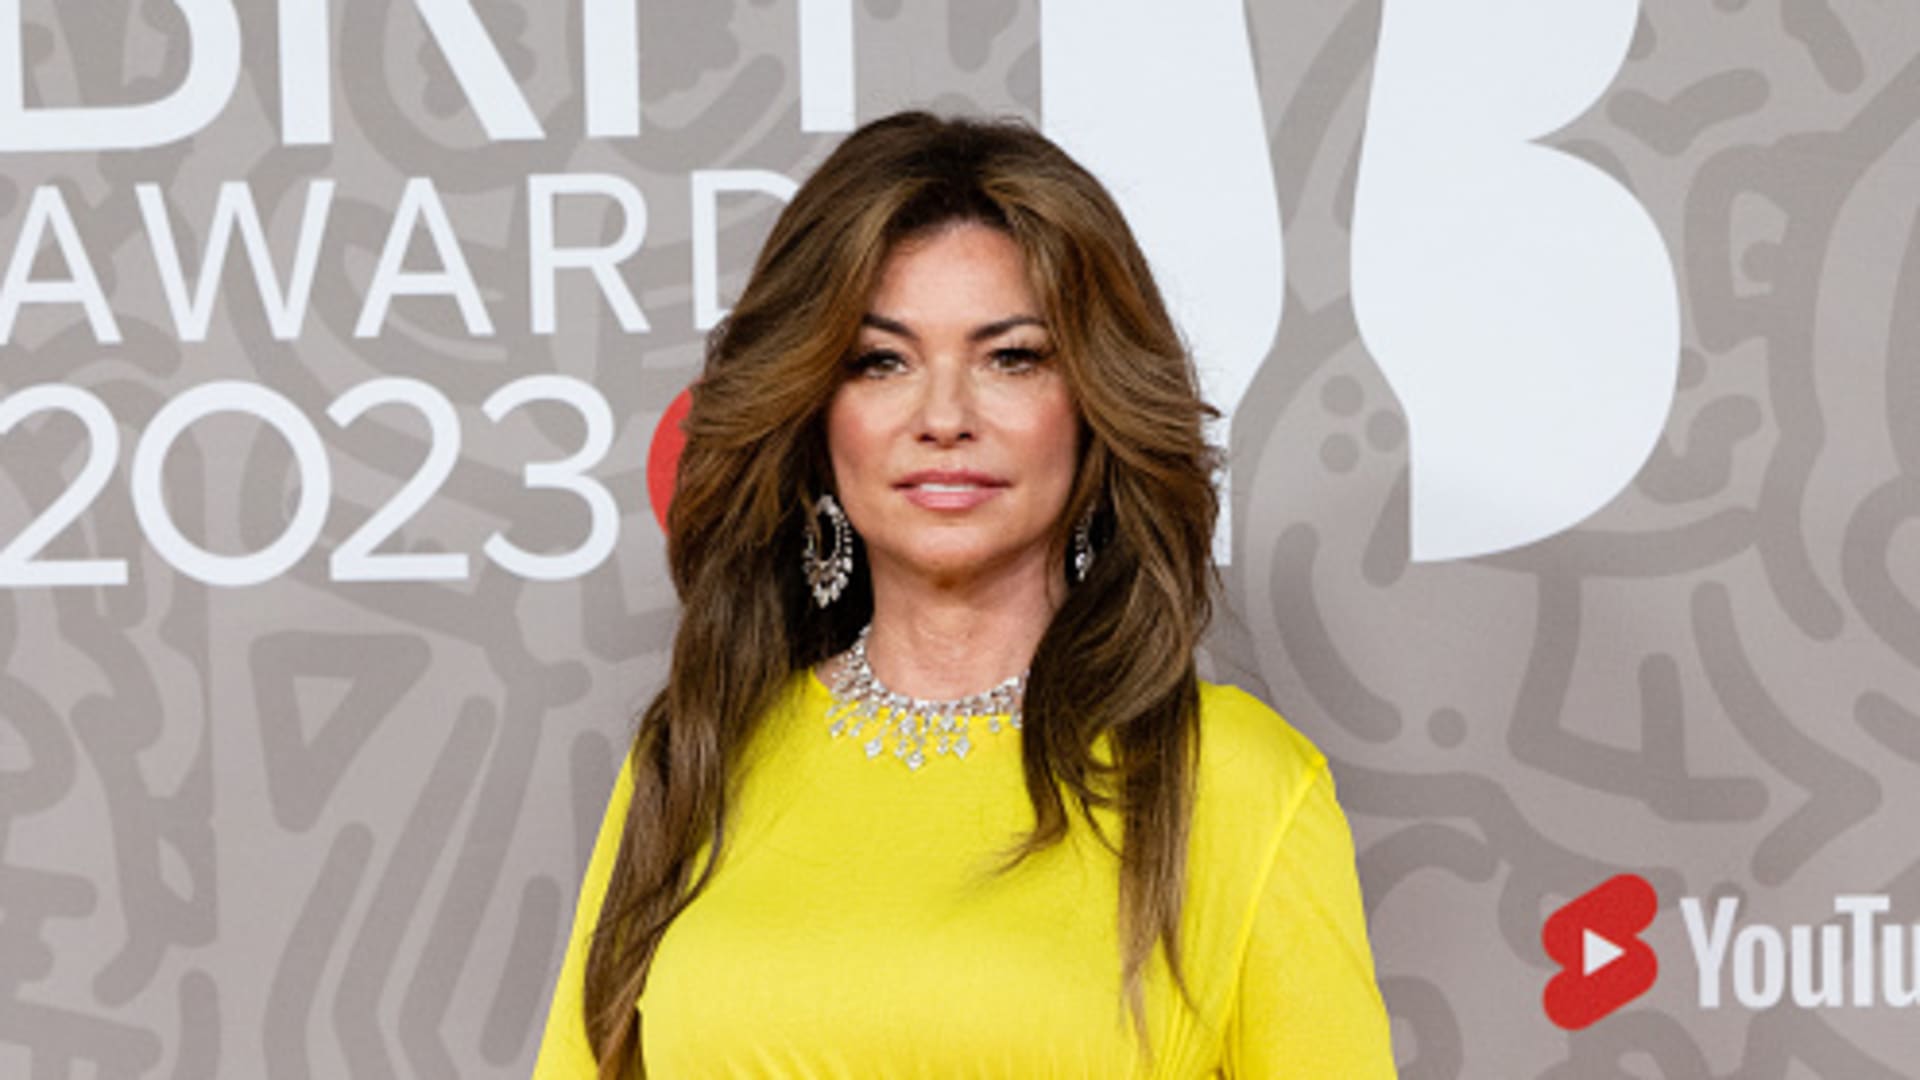 Shania Twain says the country music industry has regressed for women artists